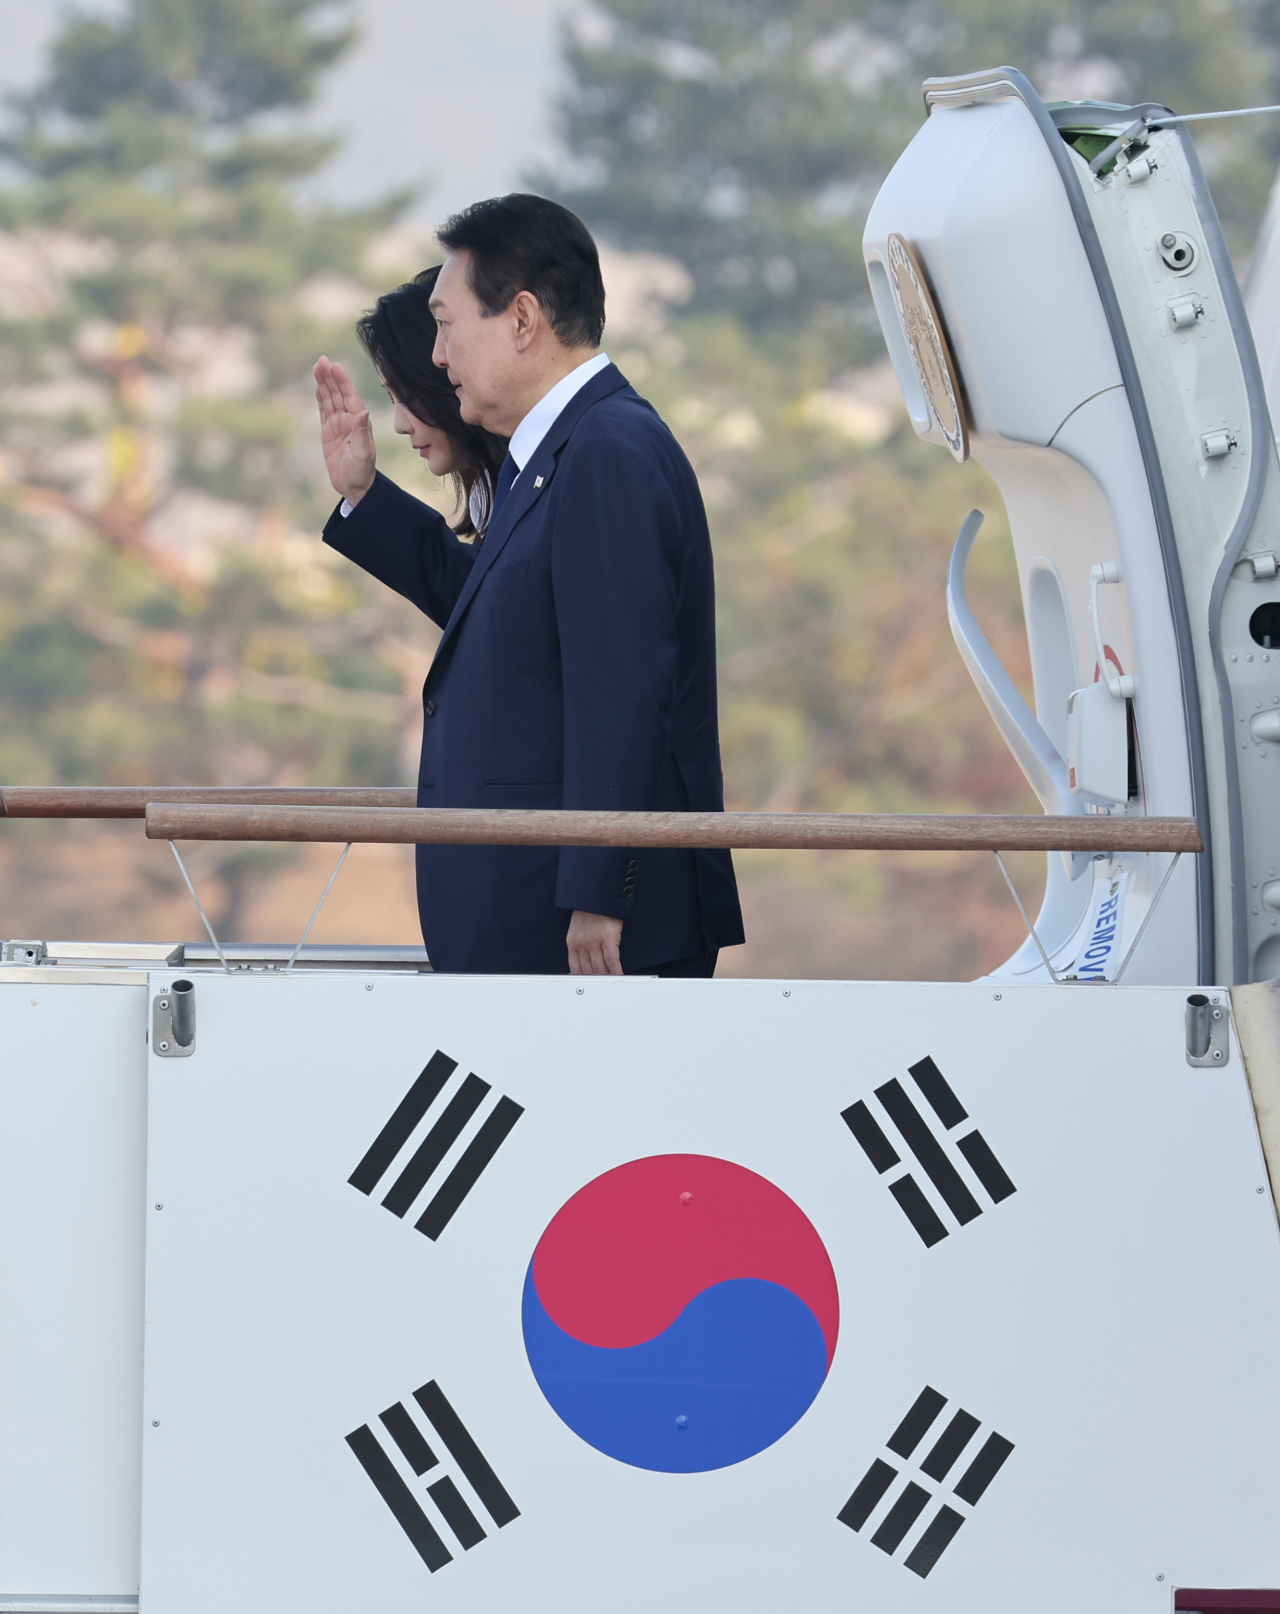 President Yoon Suk-yeol (front) and first lady Kim Keon-hee at Seoul Air Base before leaving for Cambodia on a two-nation trip on November 11, 2022. (Yonhap)